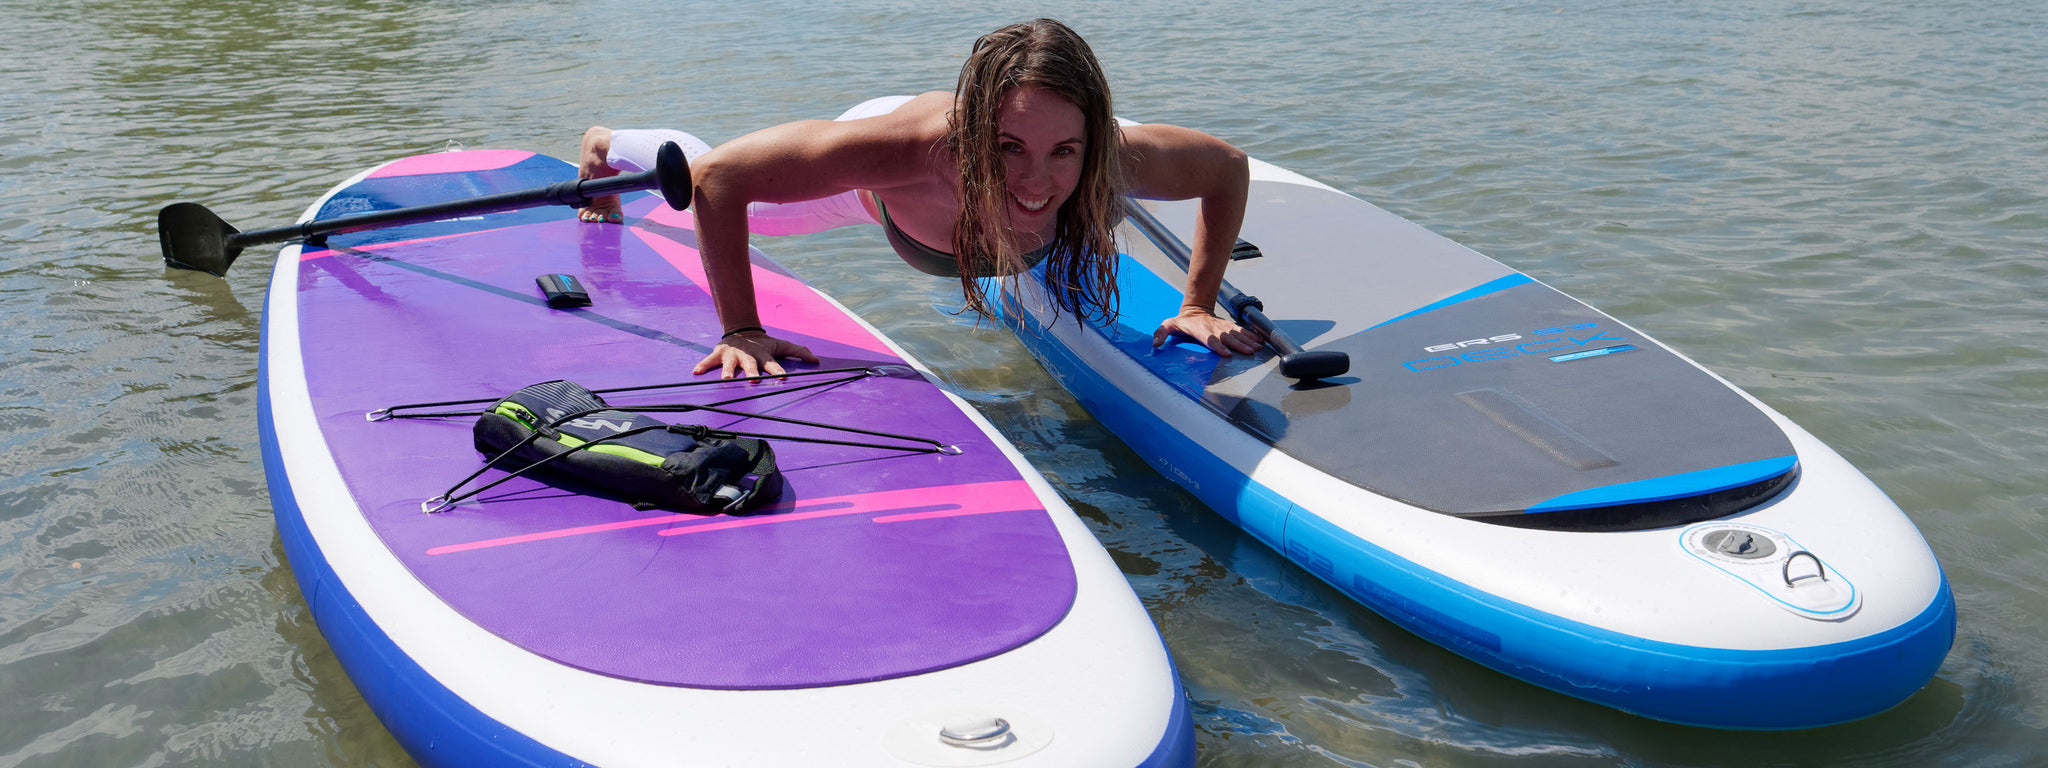 6 Tips for Stand-Up Paddle Board Fishing